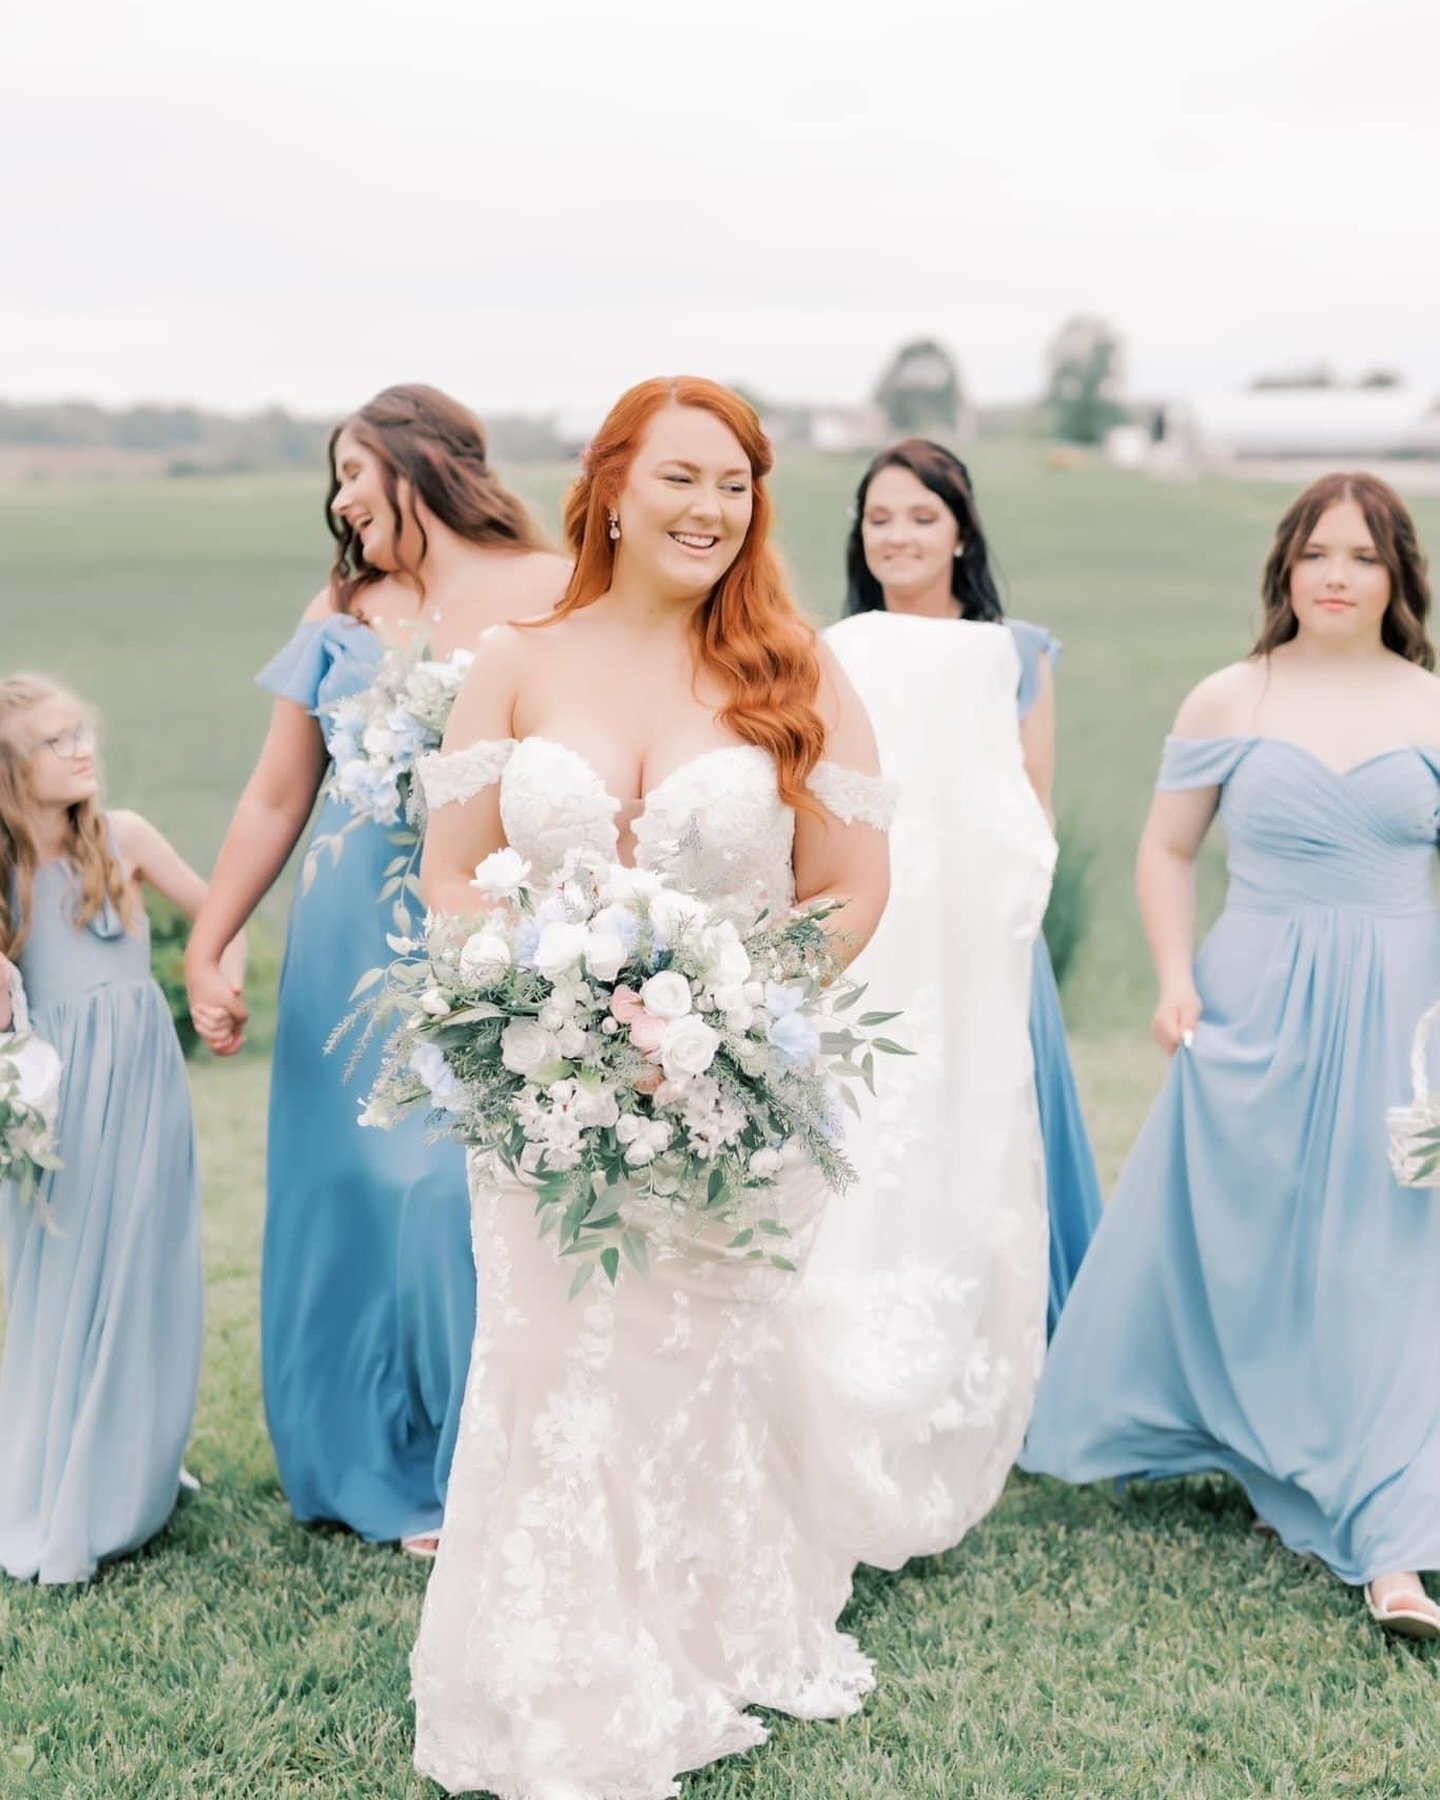 Let&rsquo;s hear it for the girls! Bridesmaids are such a special addition to your big day! Tag your bridesmaids (or future bridesmaids😉) below! ⬇️